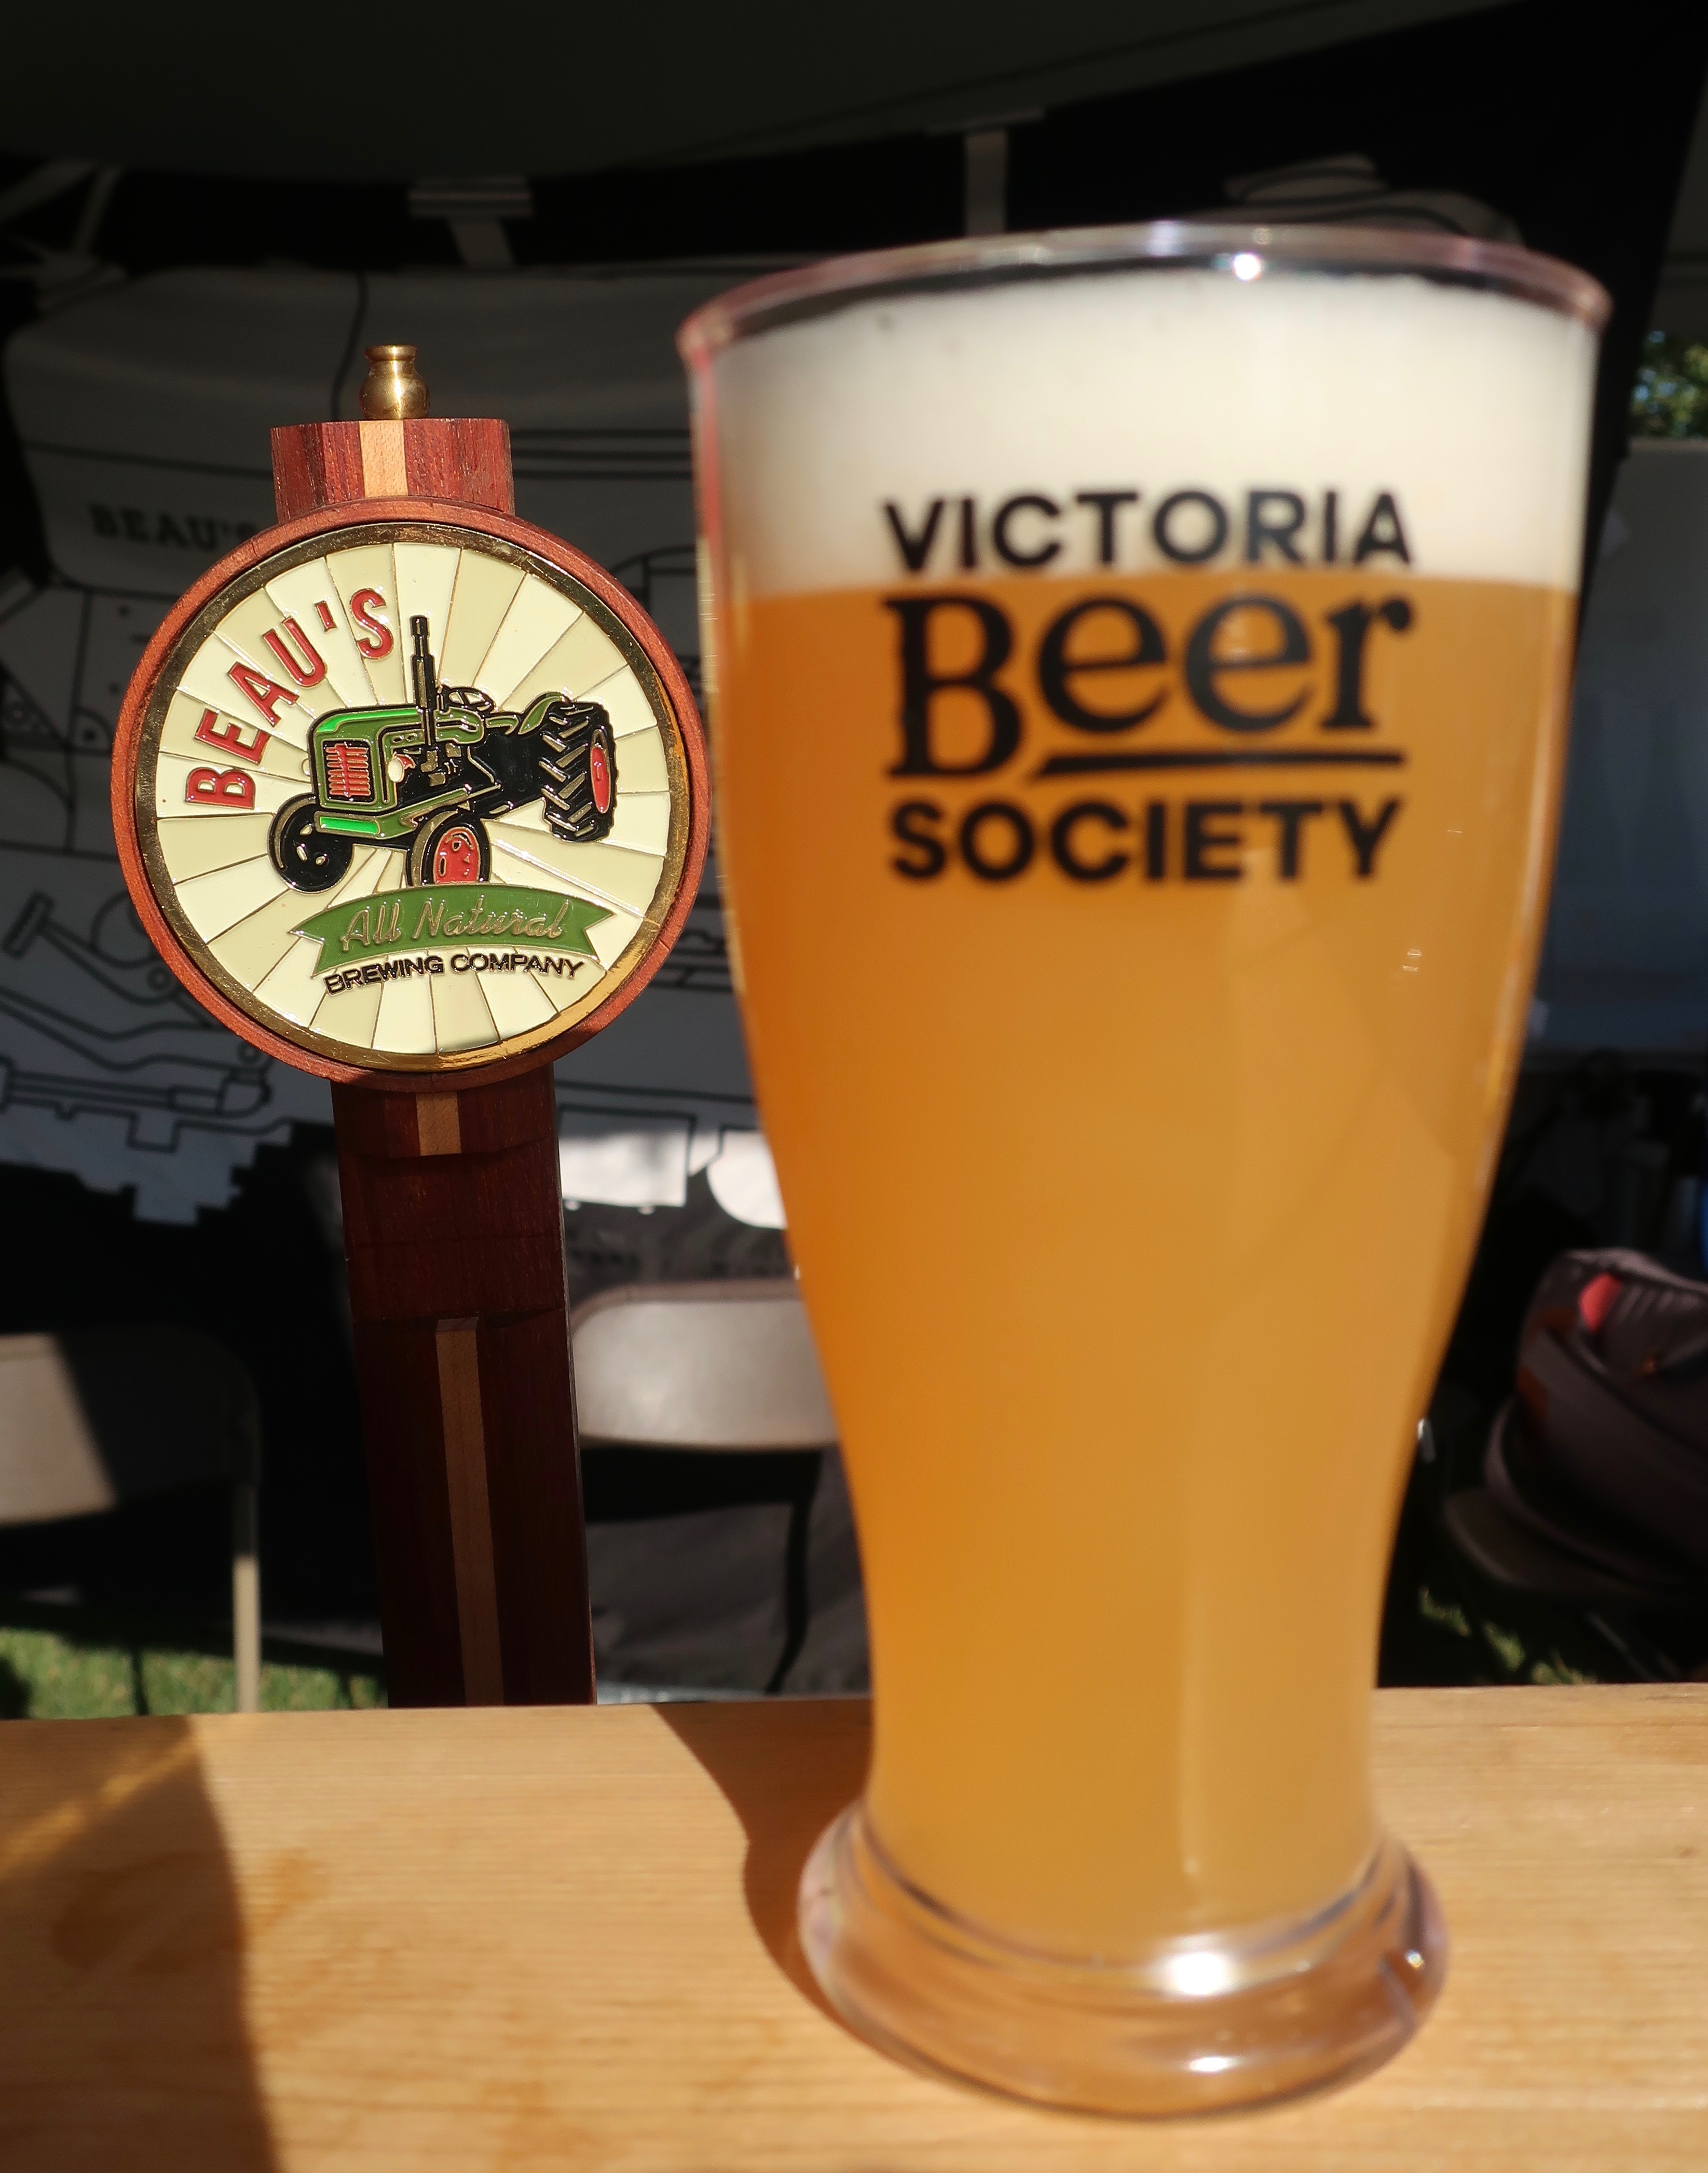 Beau's All Natural served its Full Time IPA at the 2019 Great Canadian Beer Festival.